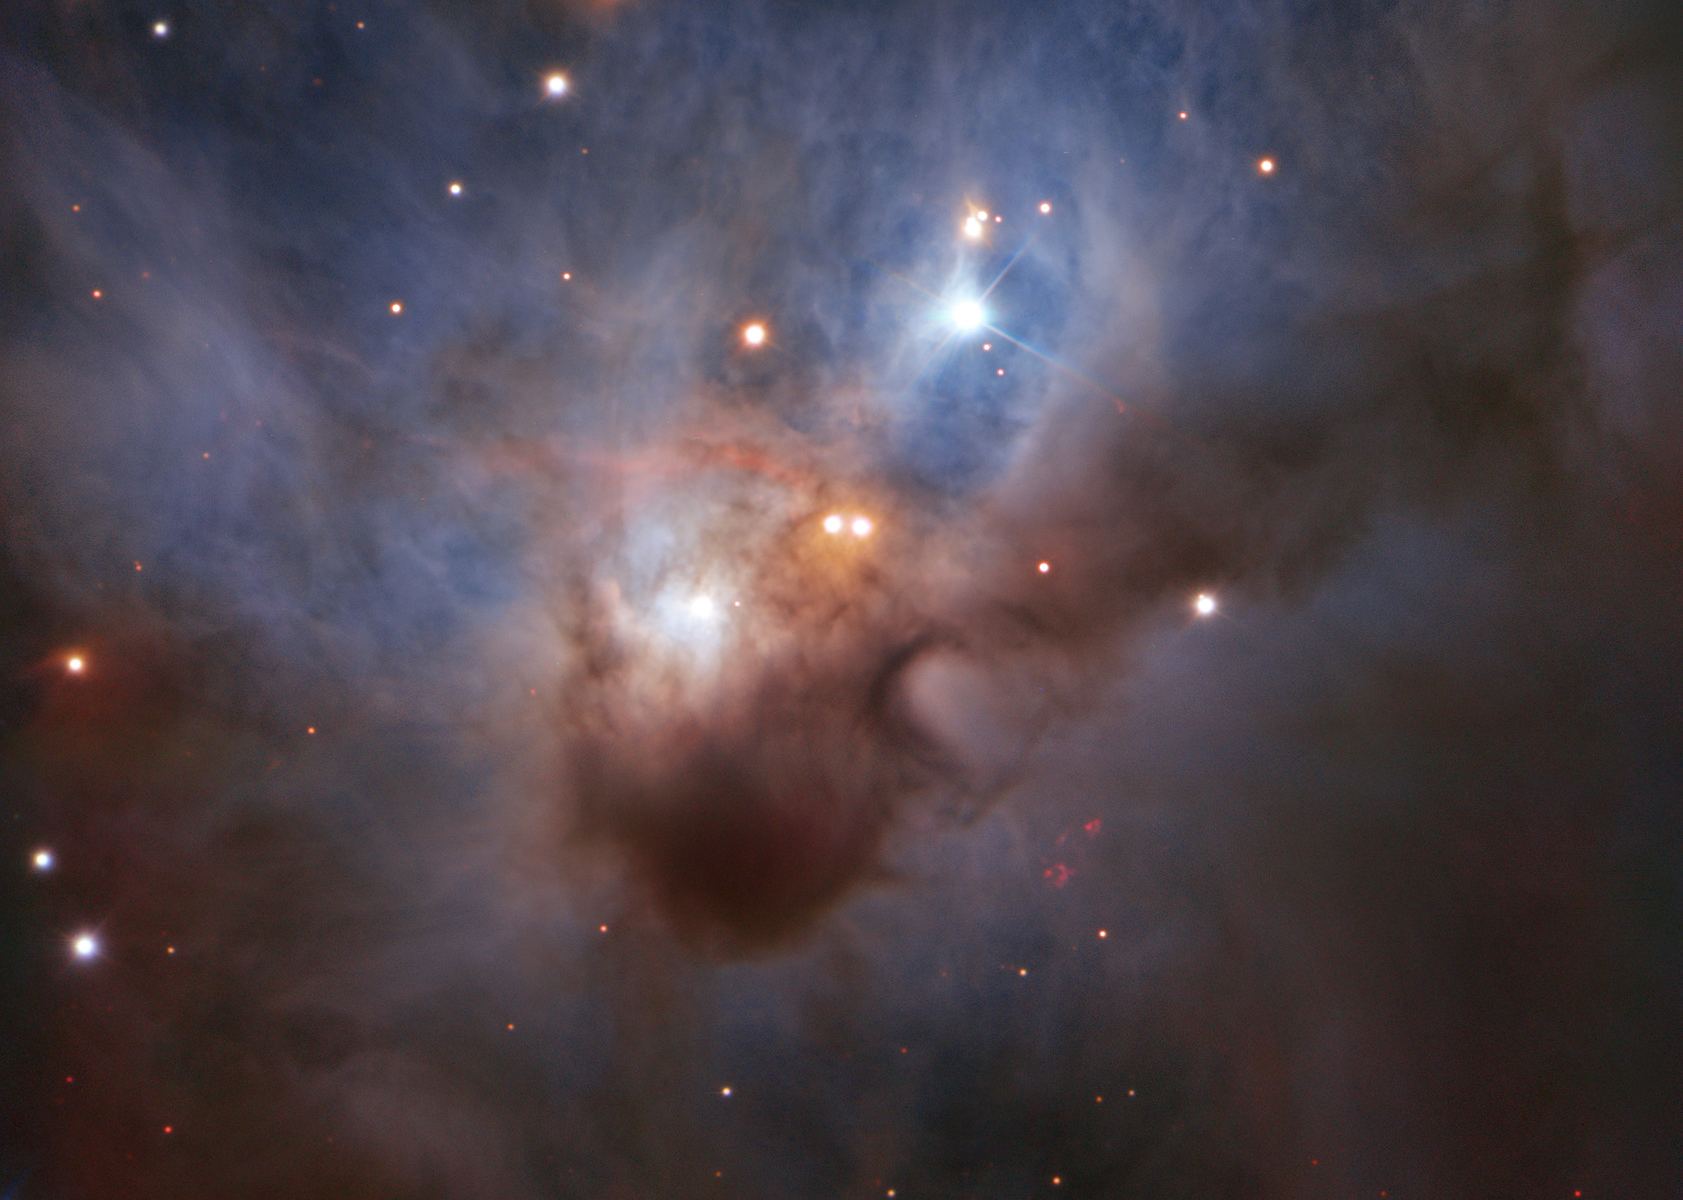 The Cosmic Bat in NGC 1788. Image Credit: ESO